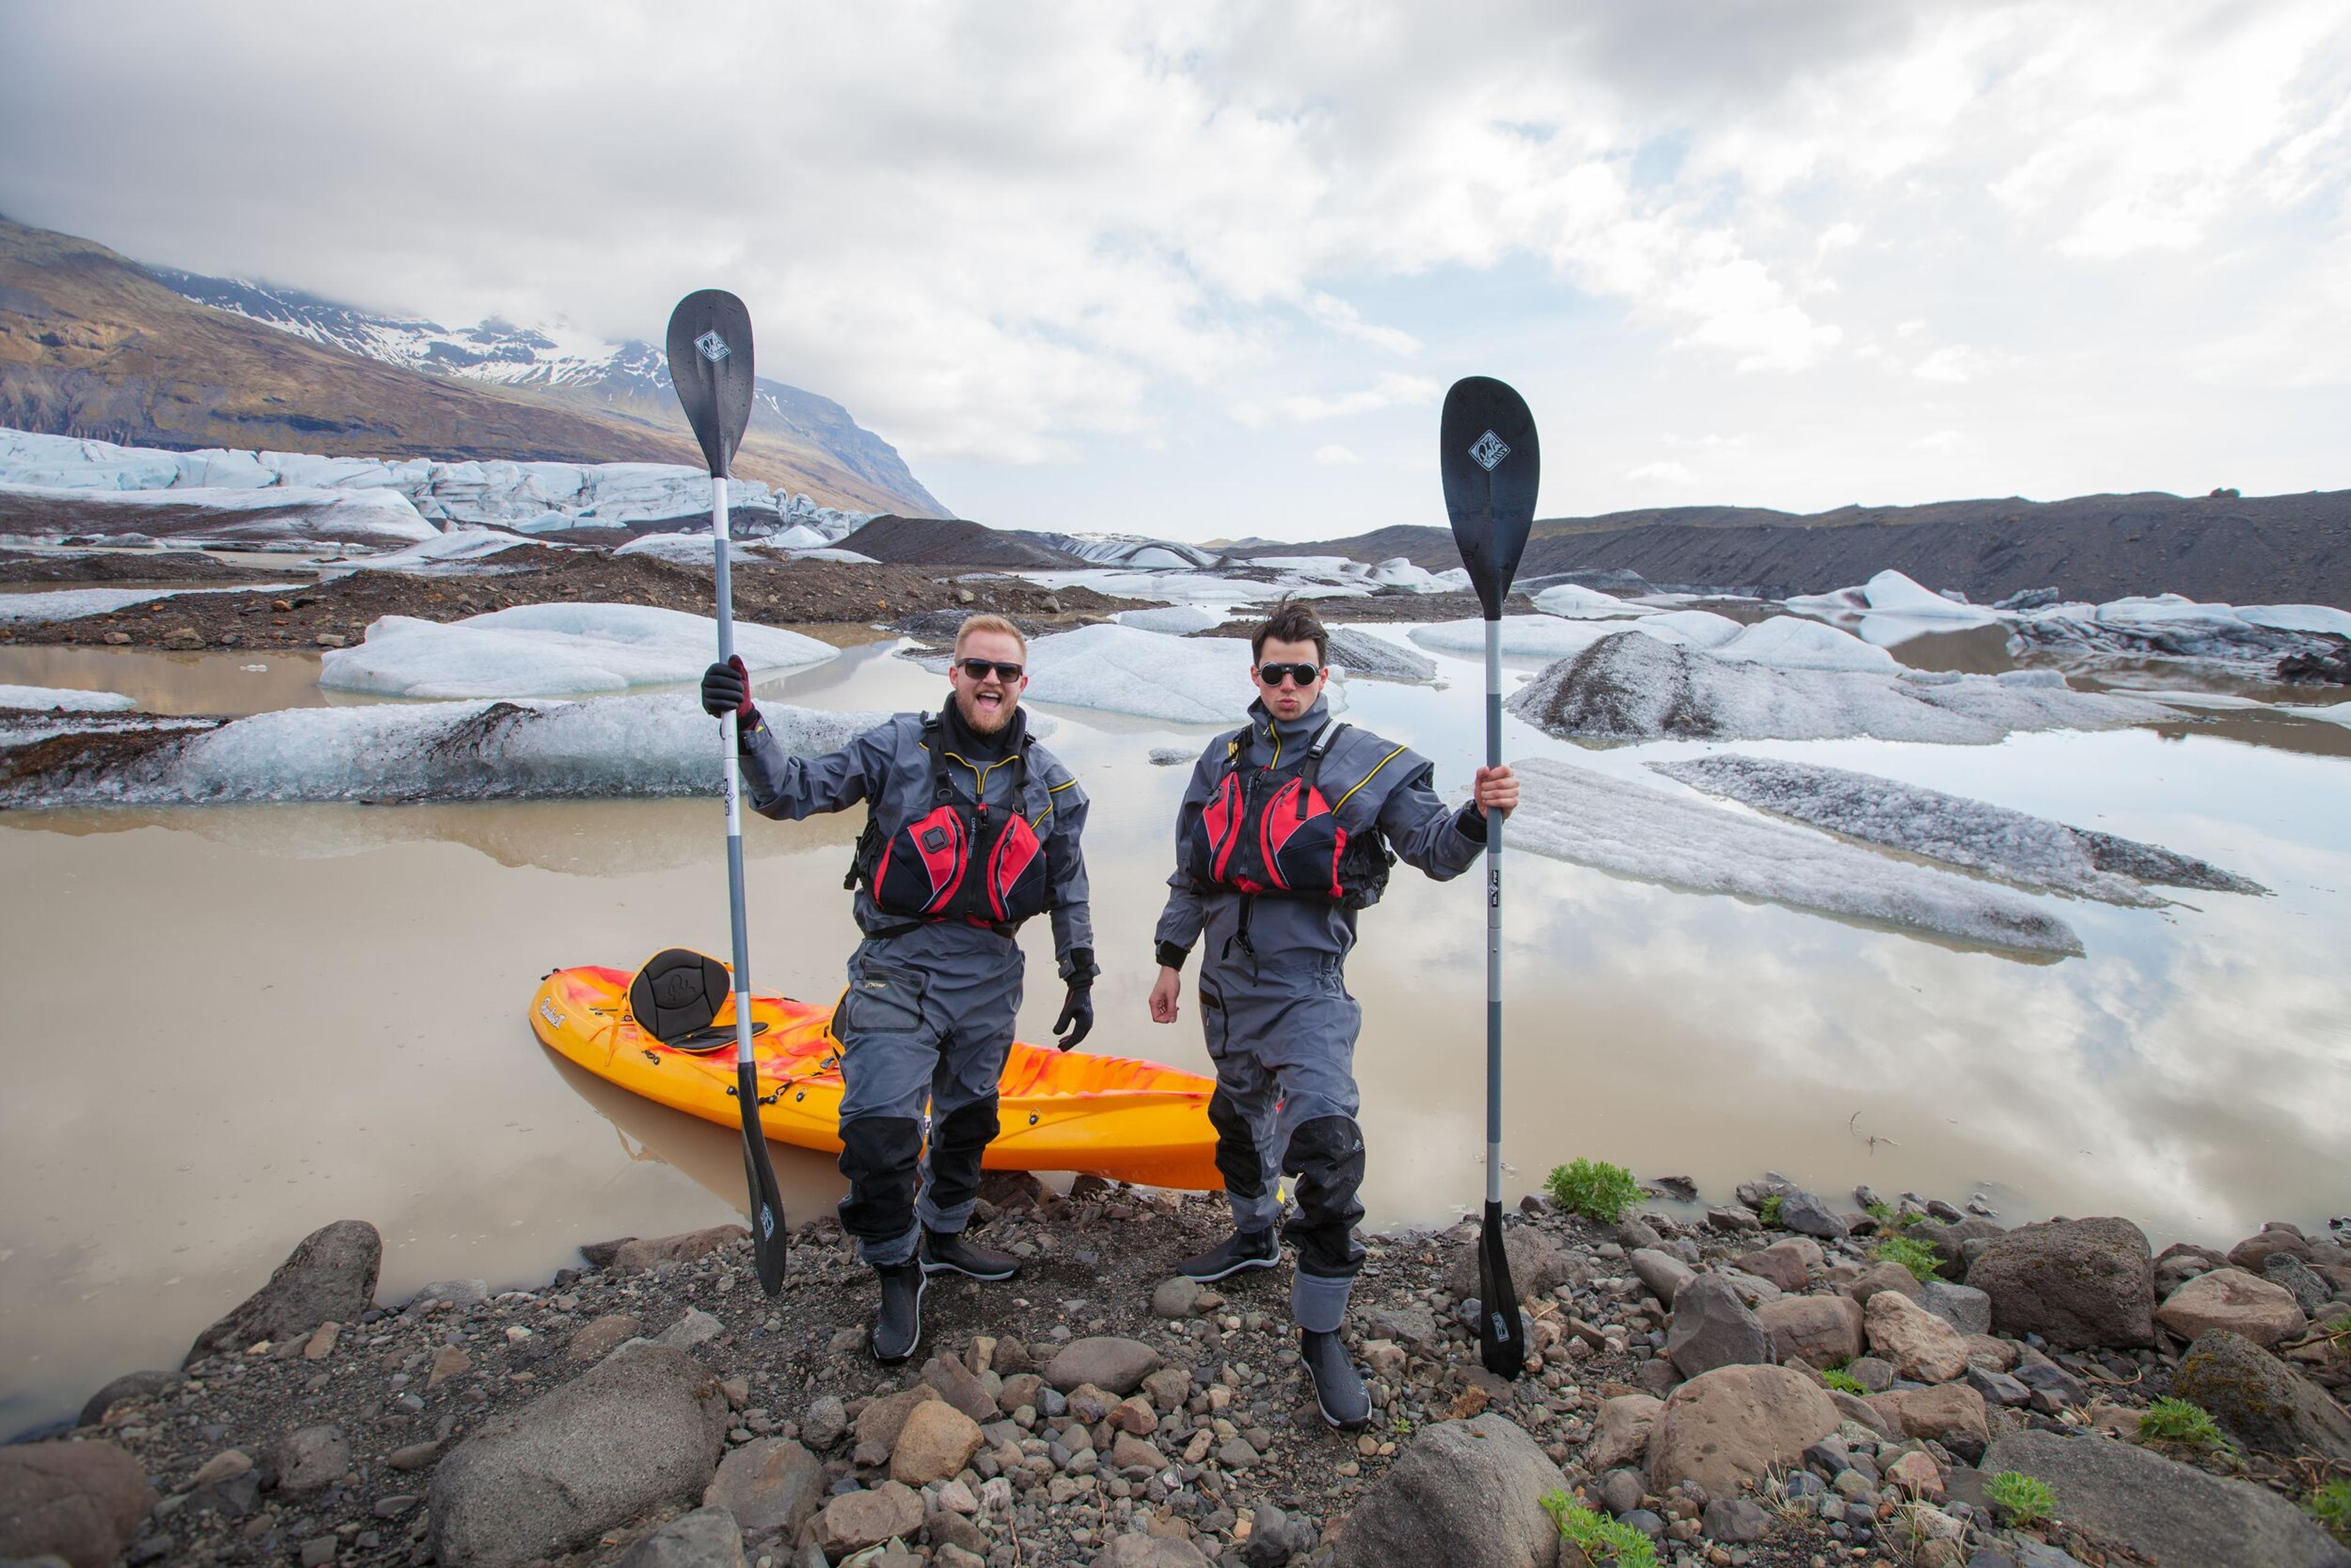 Two kayakers proudly posing with their paddles beside a vibrant yellow kayak, set against the backdrop of an iceberg-filled lagoon.